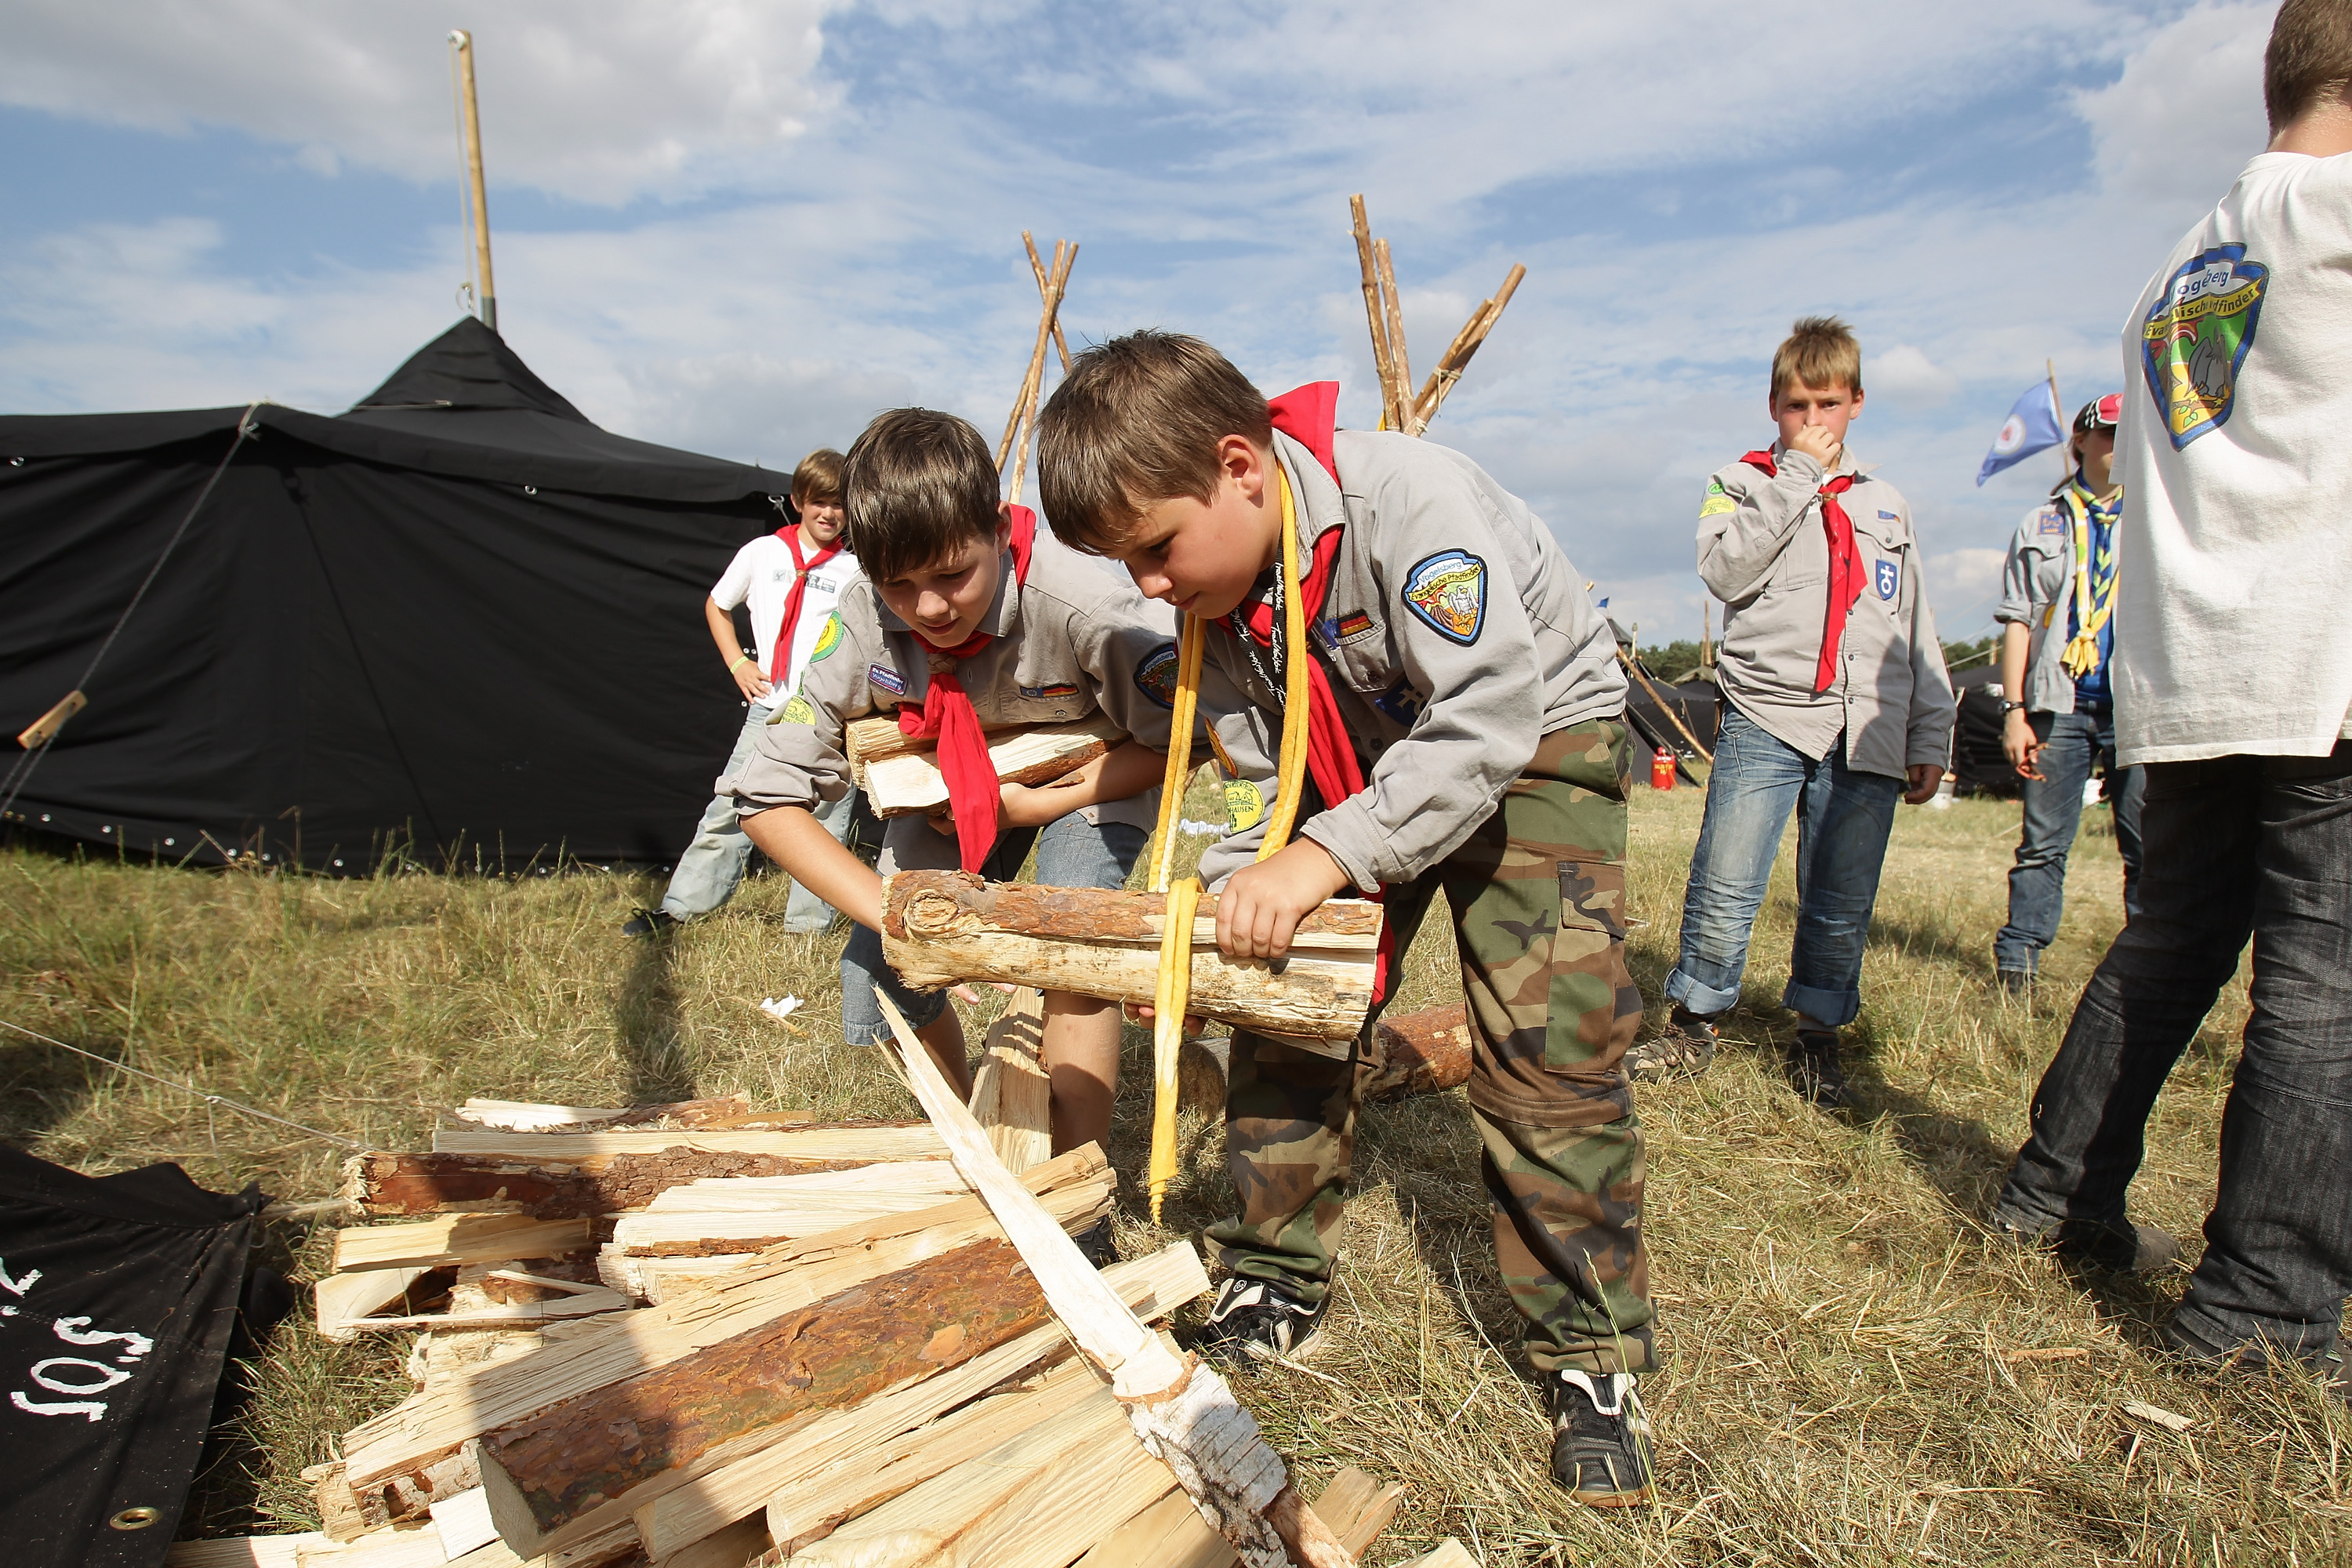 ALMKE, GERMANY - JULY 31: Scoust carry firewood at the camp on July 31, 2010 in Almke near Wolfsburg, Germany. About 5000 young scouts from Germany, Russia, Belgium, Suisse, USA and Italy aged 12 to 20 participate in a camp. Since 1973, the German VCP-Christian Guides and Pathfinders organisation, offers an International historic boys and girls scout meeting during the summer holidays. On a 25 hectare field include 1370 tens, a tent church and a tent theater. The Federal camp is held every four years. (Photo by Andreas Rentz/Getty Images)